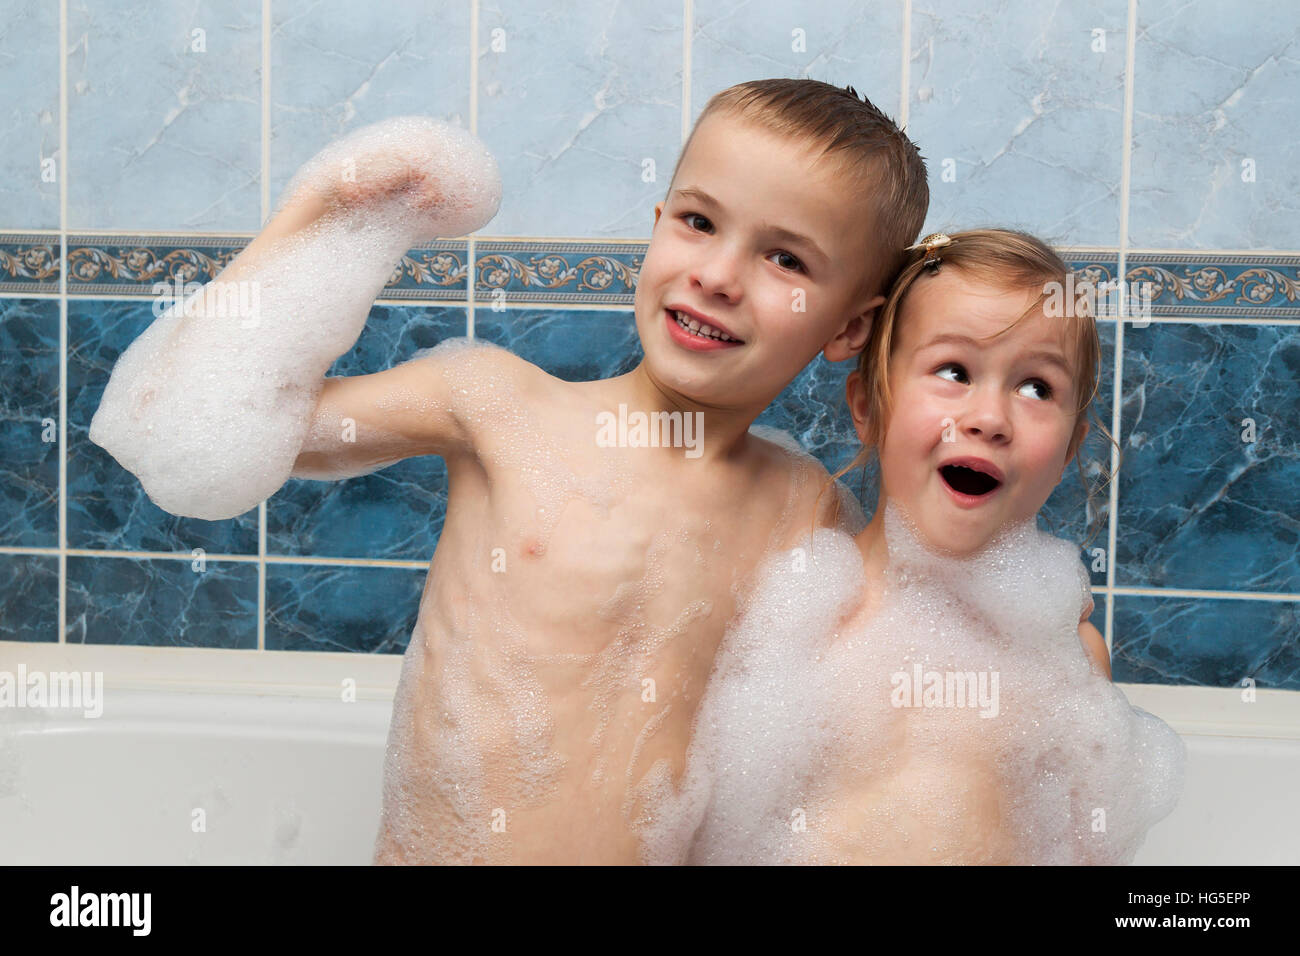 Brother And Sister Taking A Bubble Bath Little Boy And Girl